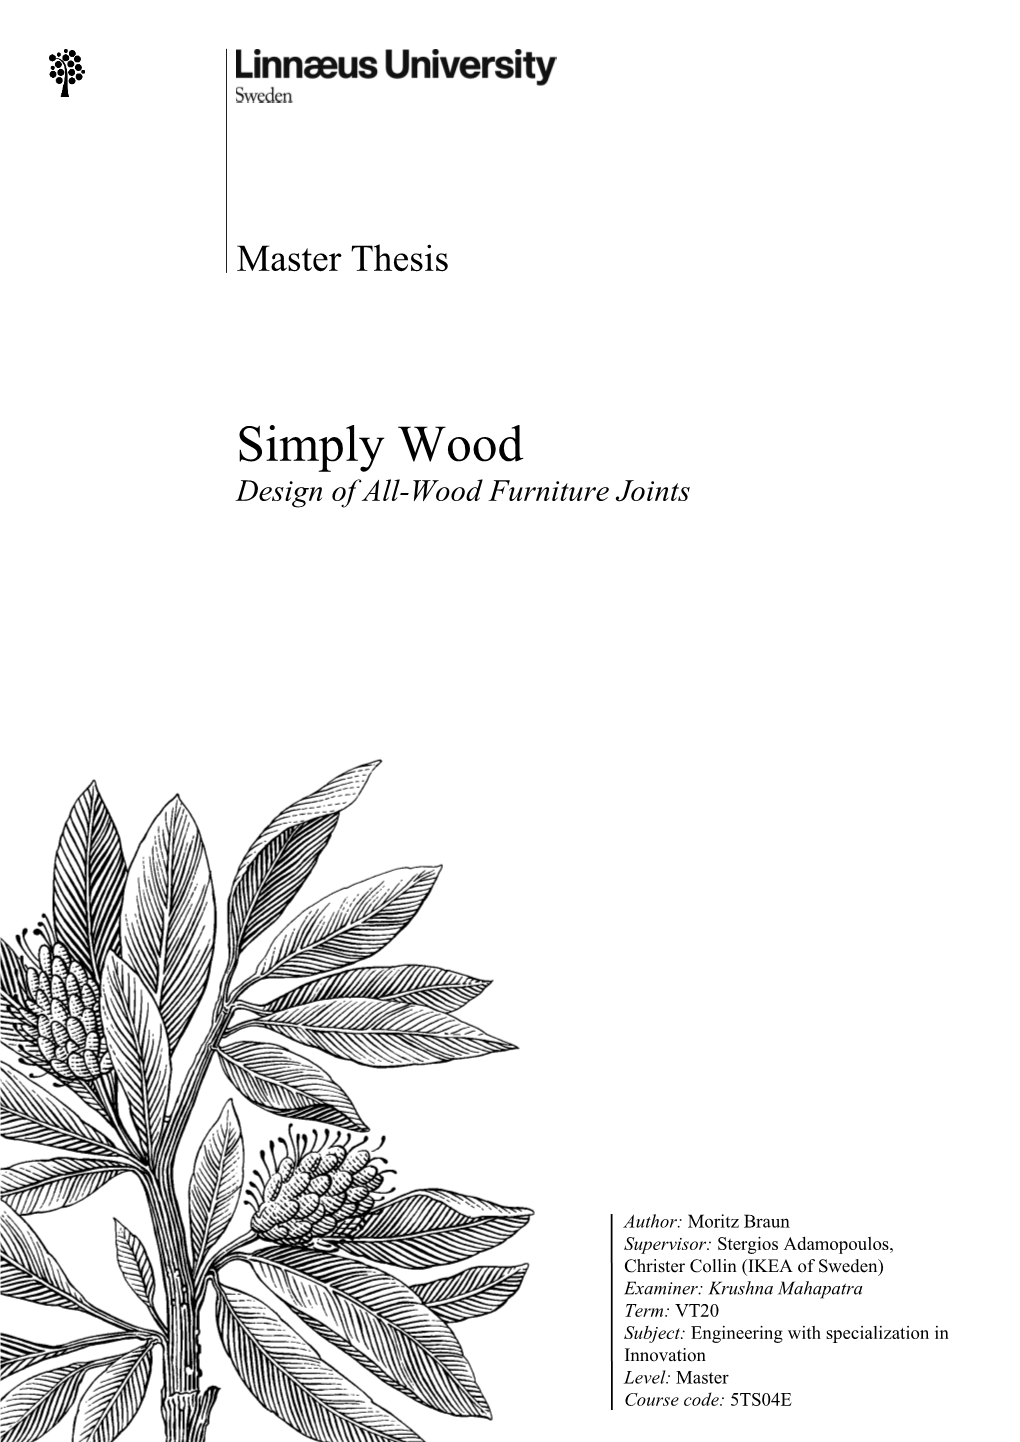 Simply Wood Design of All-Wood Furniture Joints